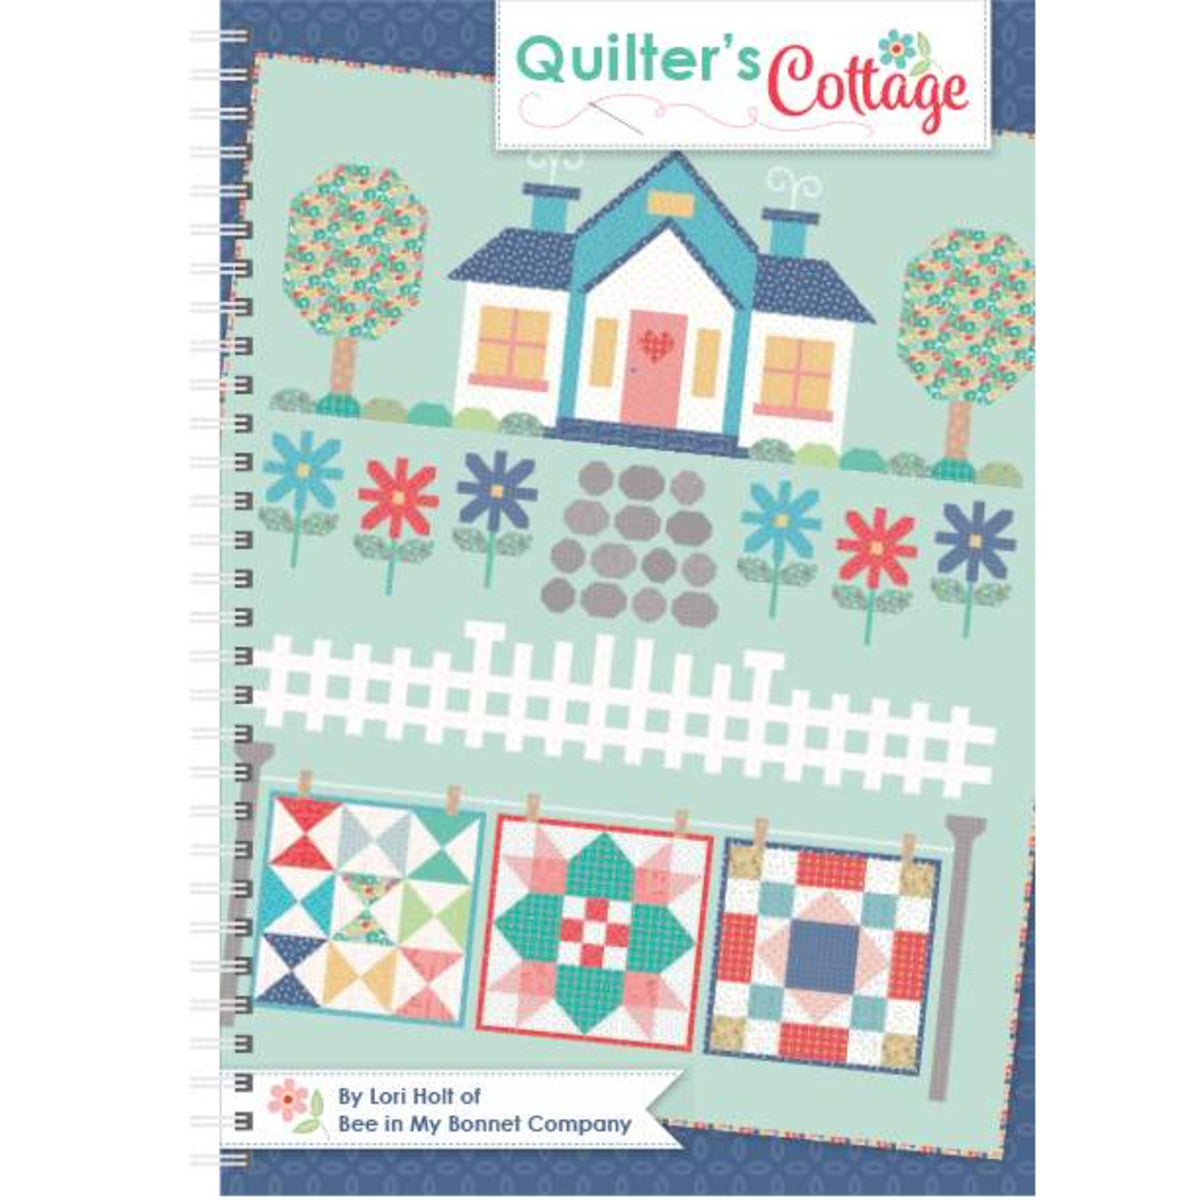 Quilter's Cottage by Lori Holt of Bee in my Bonnet for It's Sew Emma